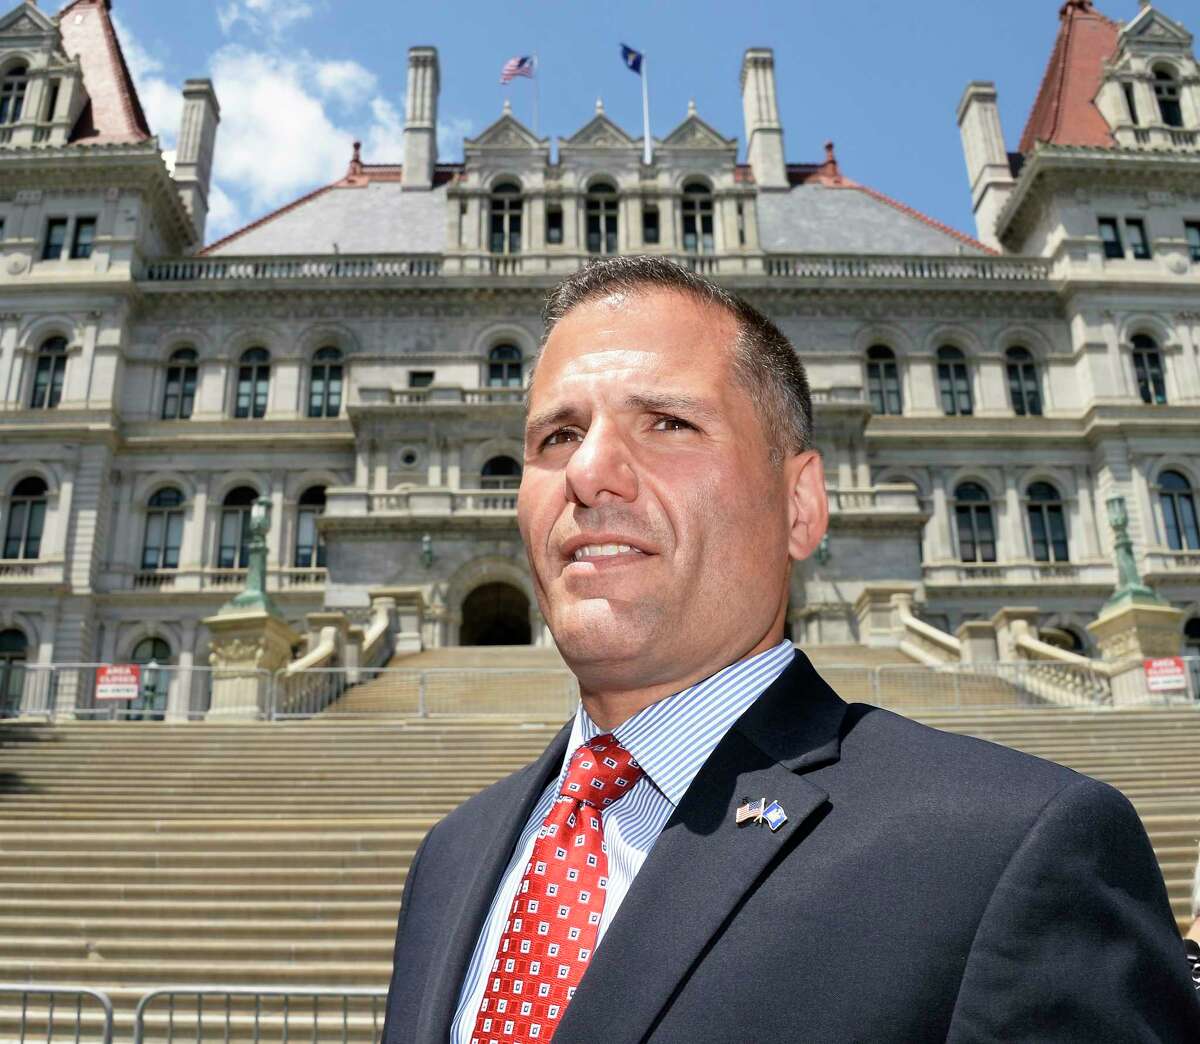 Gubernatorial Candidate Marc Molinaro arrives at the Capitol to call on the office of the United States Attorney to investigate possible federal laws broken by Governor Andrew Cuomo Wednesday July 18, 2018 in Albany, NY. (John Carl D'Annibale/Times Union)